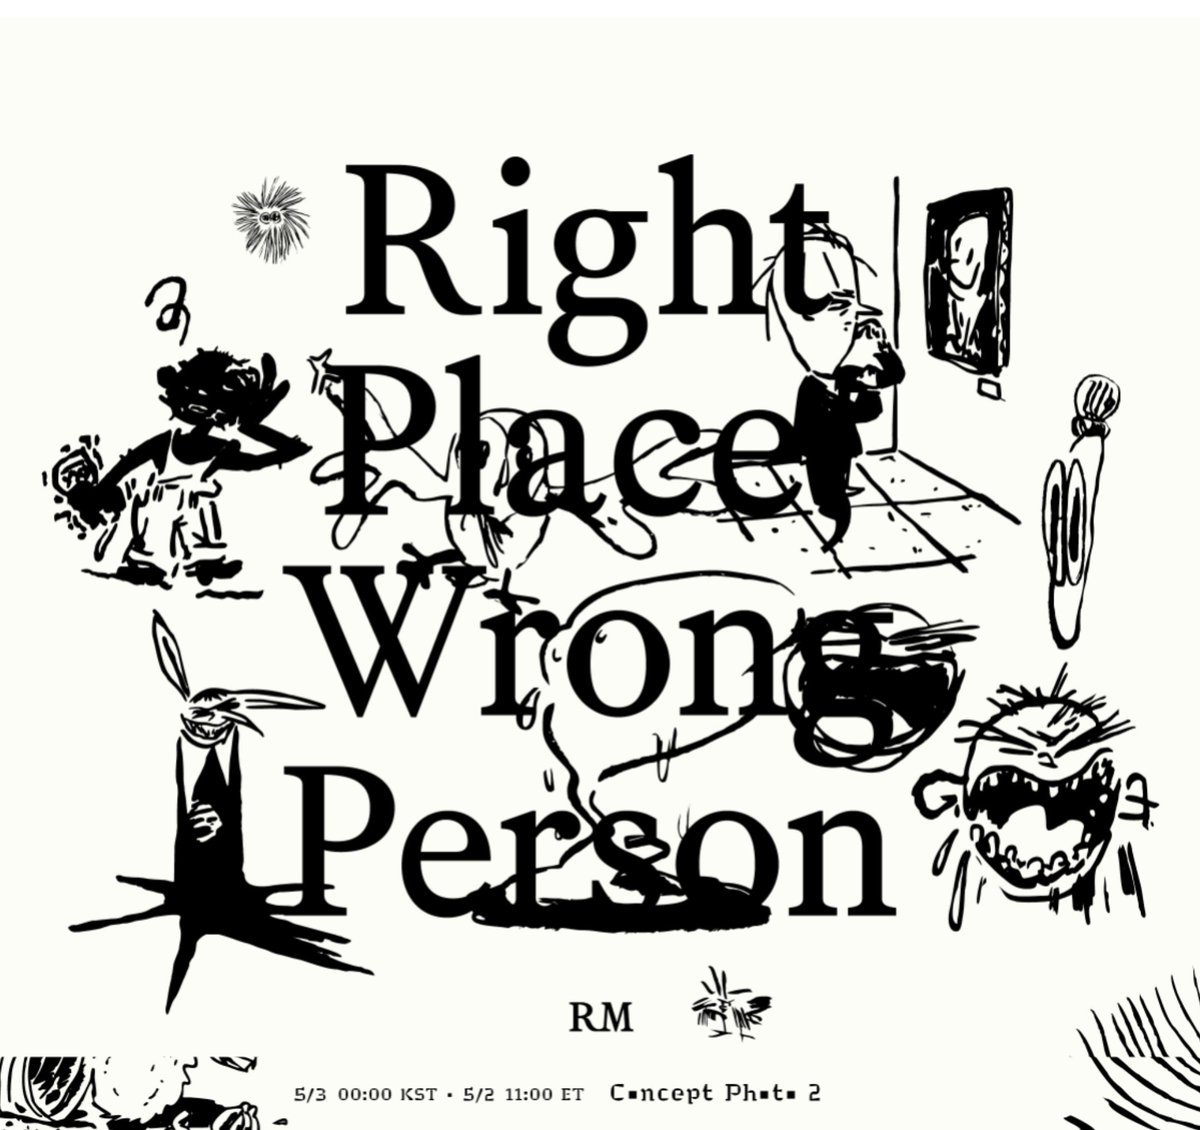 RM IS COMING RPWP CONCEPT PHOTO 2 RIGHT PLACE WRONG PERSON #RM #RightPlaceWrongPerson